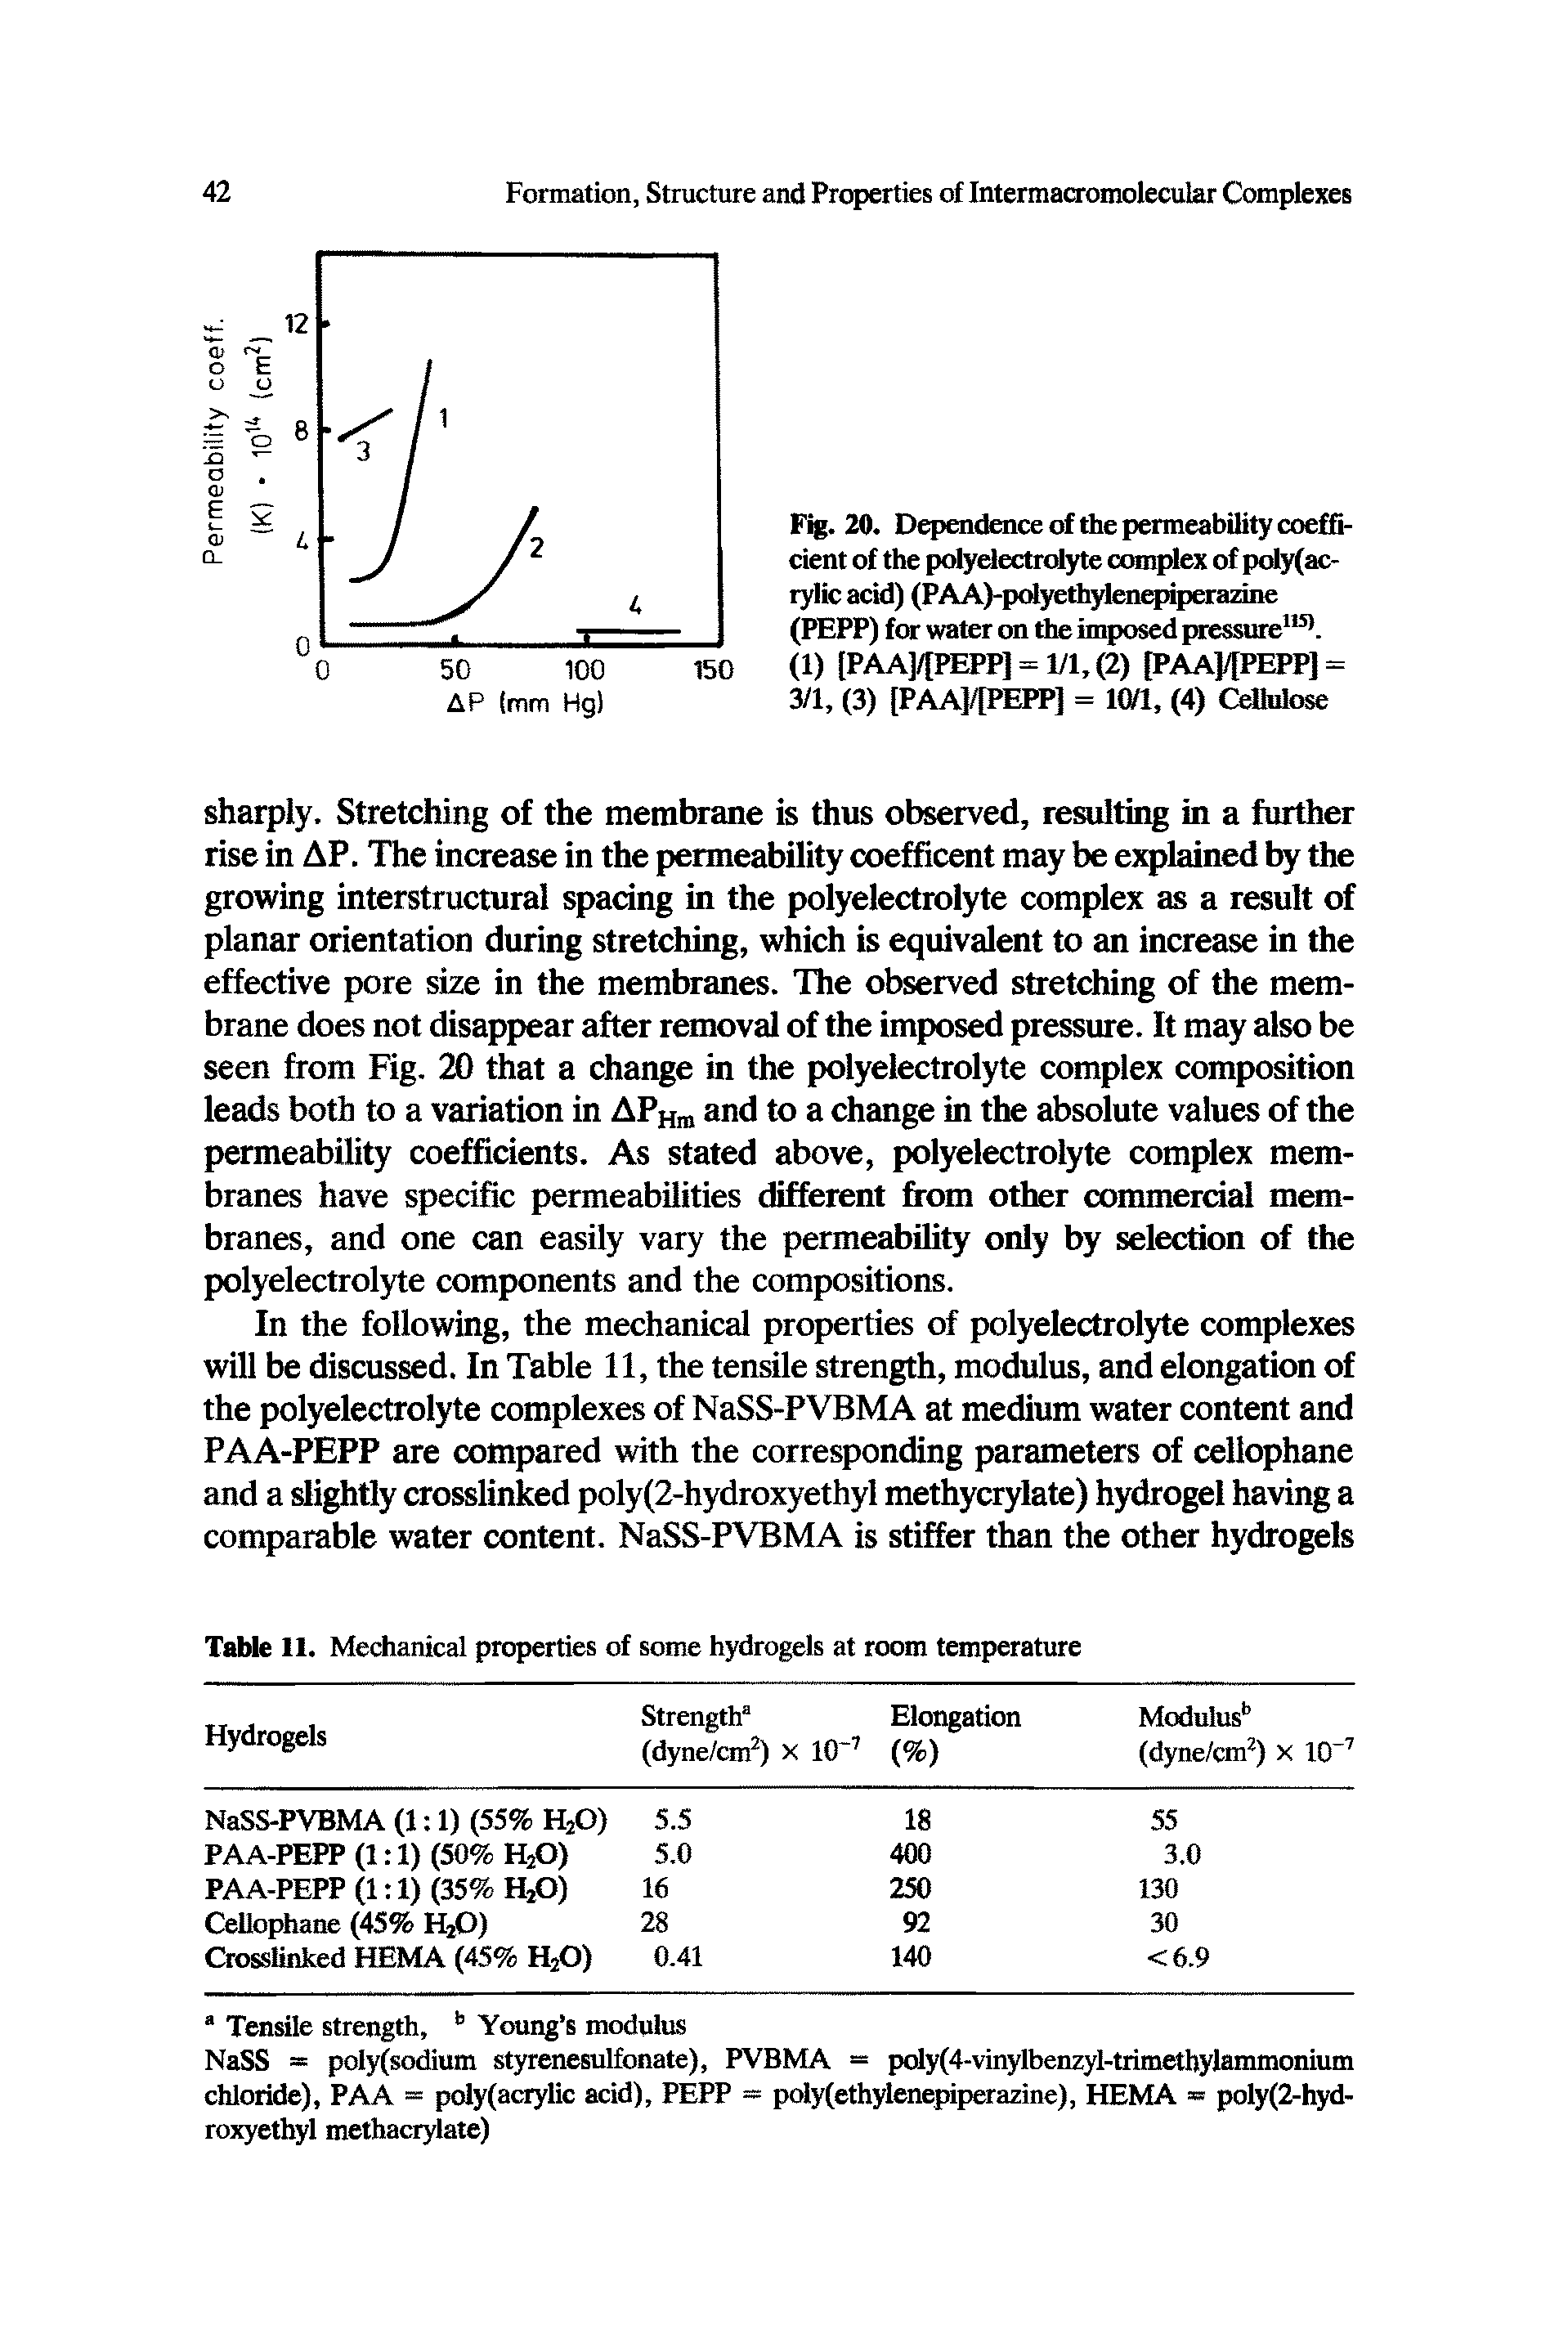 Fig. 20. Dependence of the permeability coefficient of the polyelectrolyte complex of poly(ac-rylic acid) (PAA)-polyethylenepiperazine (PEPP) for water on the imposed pressure115 . (1) [PAA]/[PEPP] = 1/1, (2) [PAA]/[PEPP] = 3/1, (3) [PAA]/[PEPP] = 10/1, (4) Cellulose...